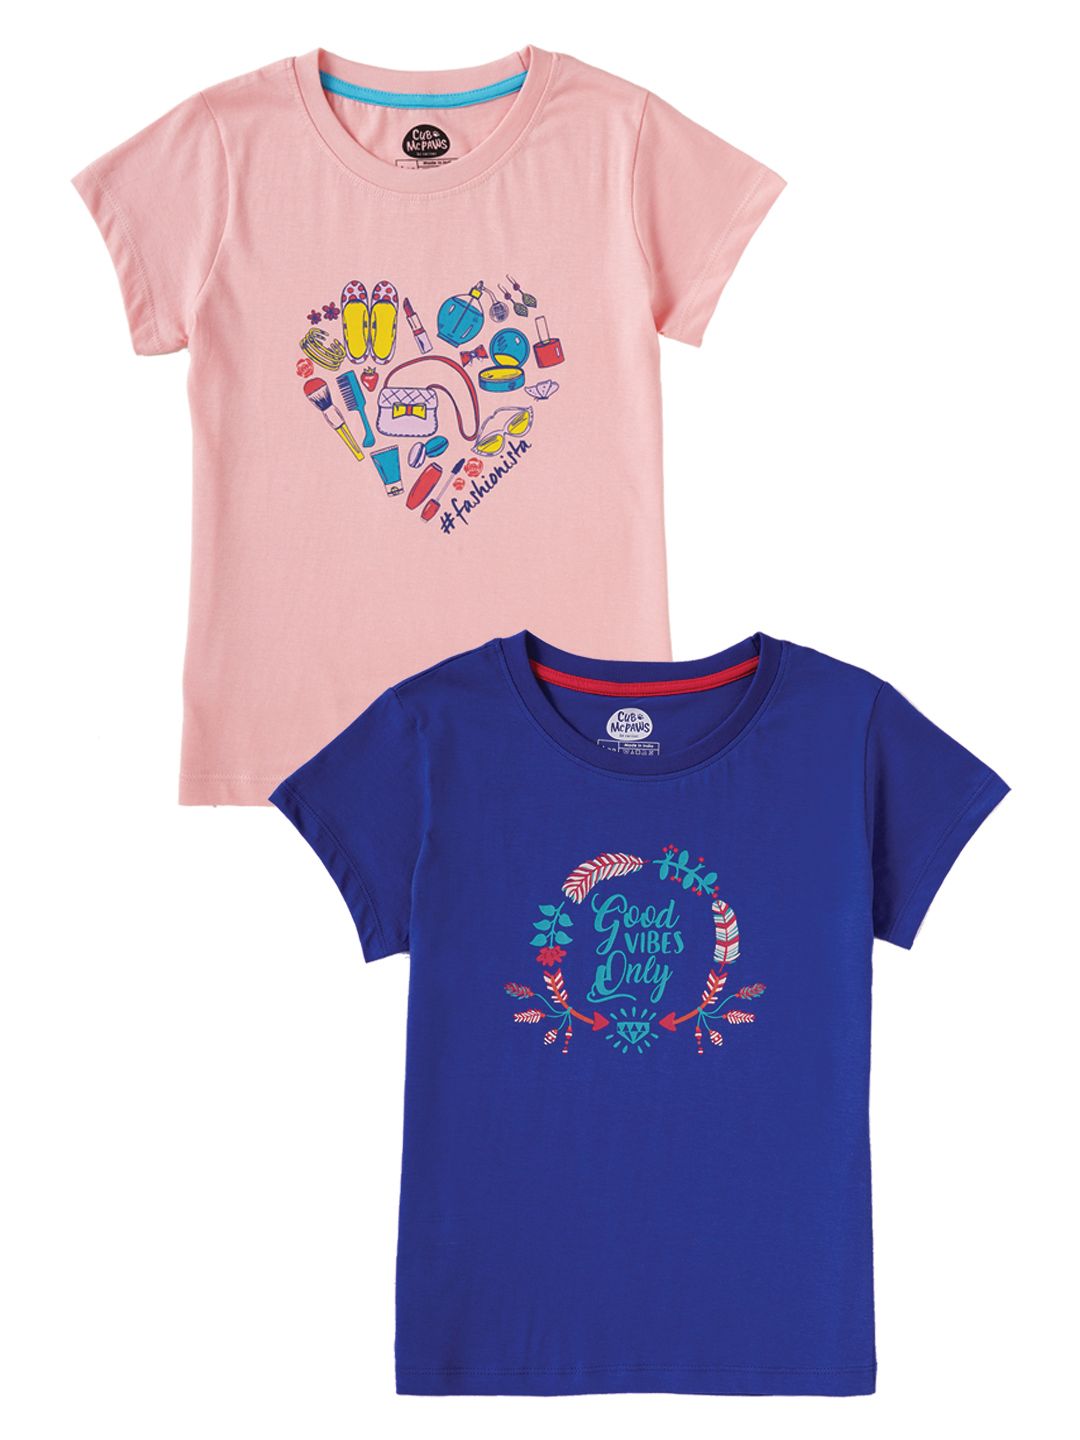 Buy Brilliant Basics - Girls Pack of 2 T-Shirts, 8 to 12 Years (Pink, Blue)  Online at 73% OFF | Cub McPaws